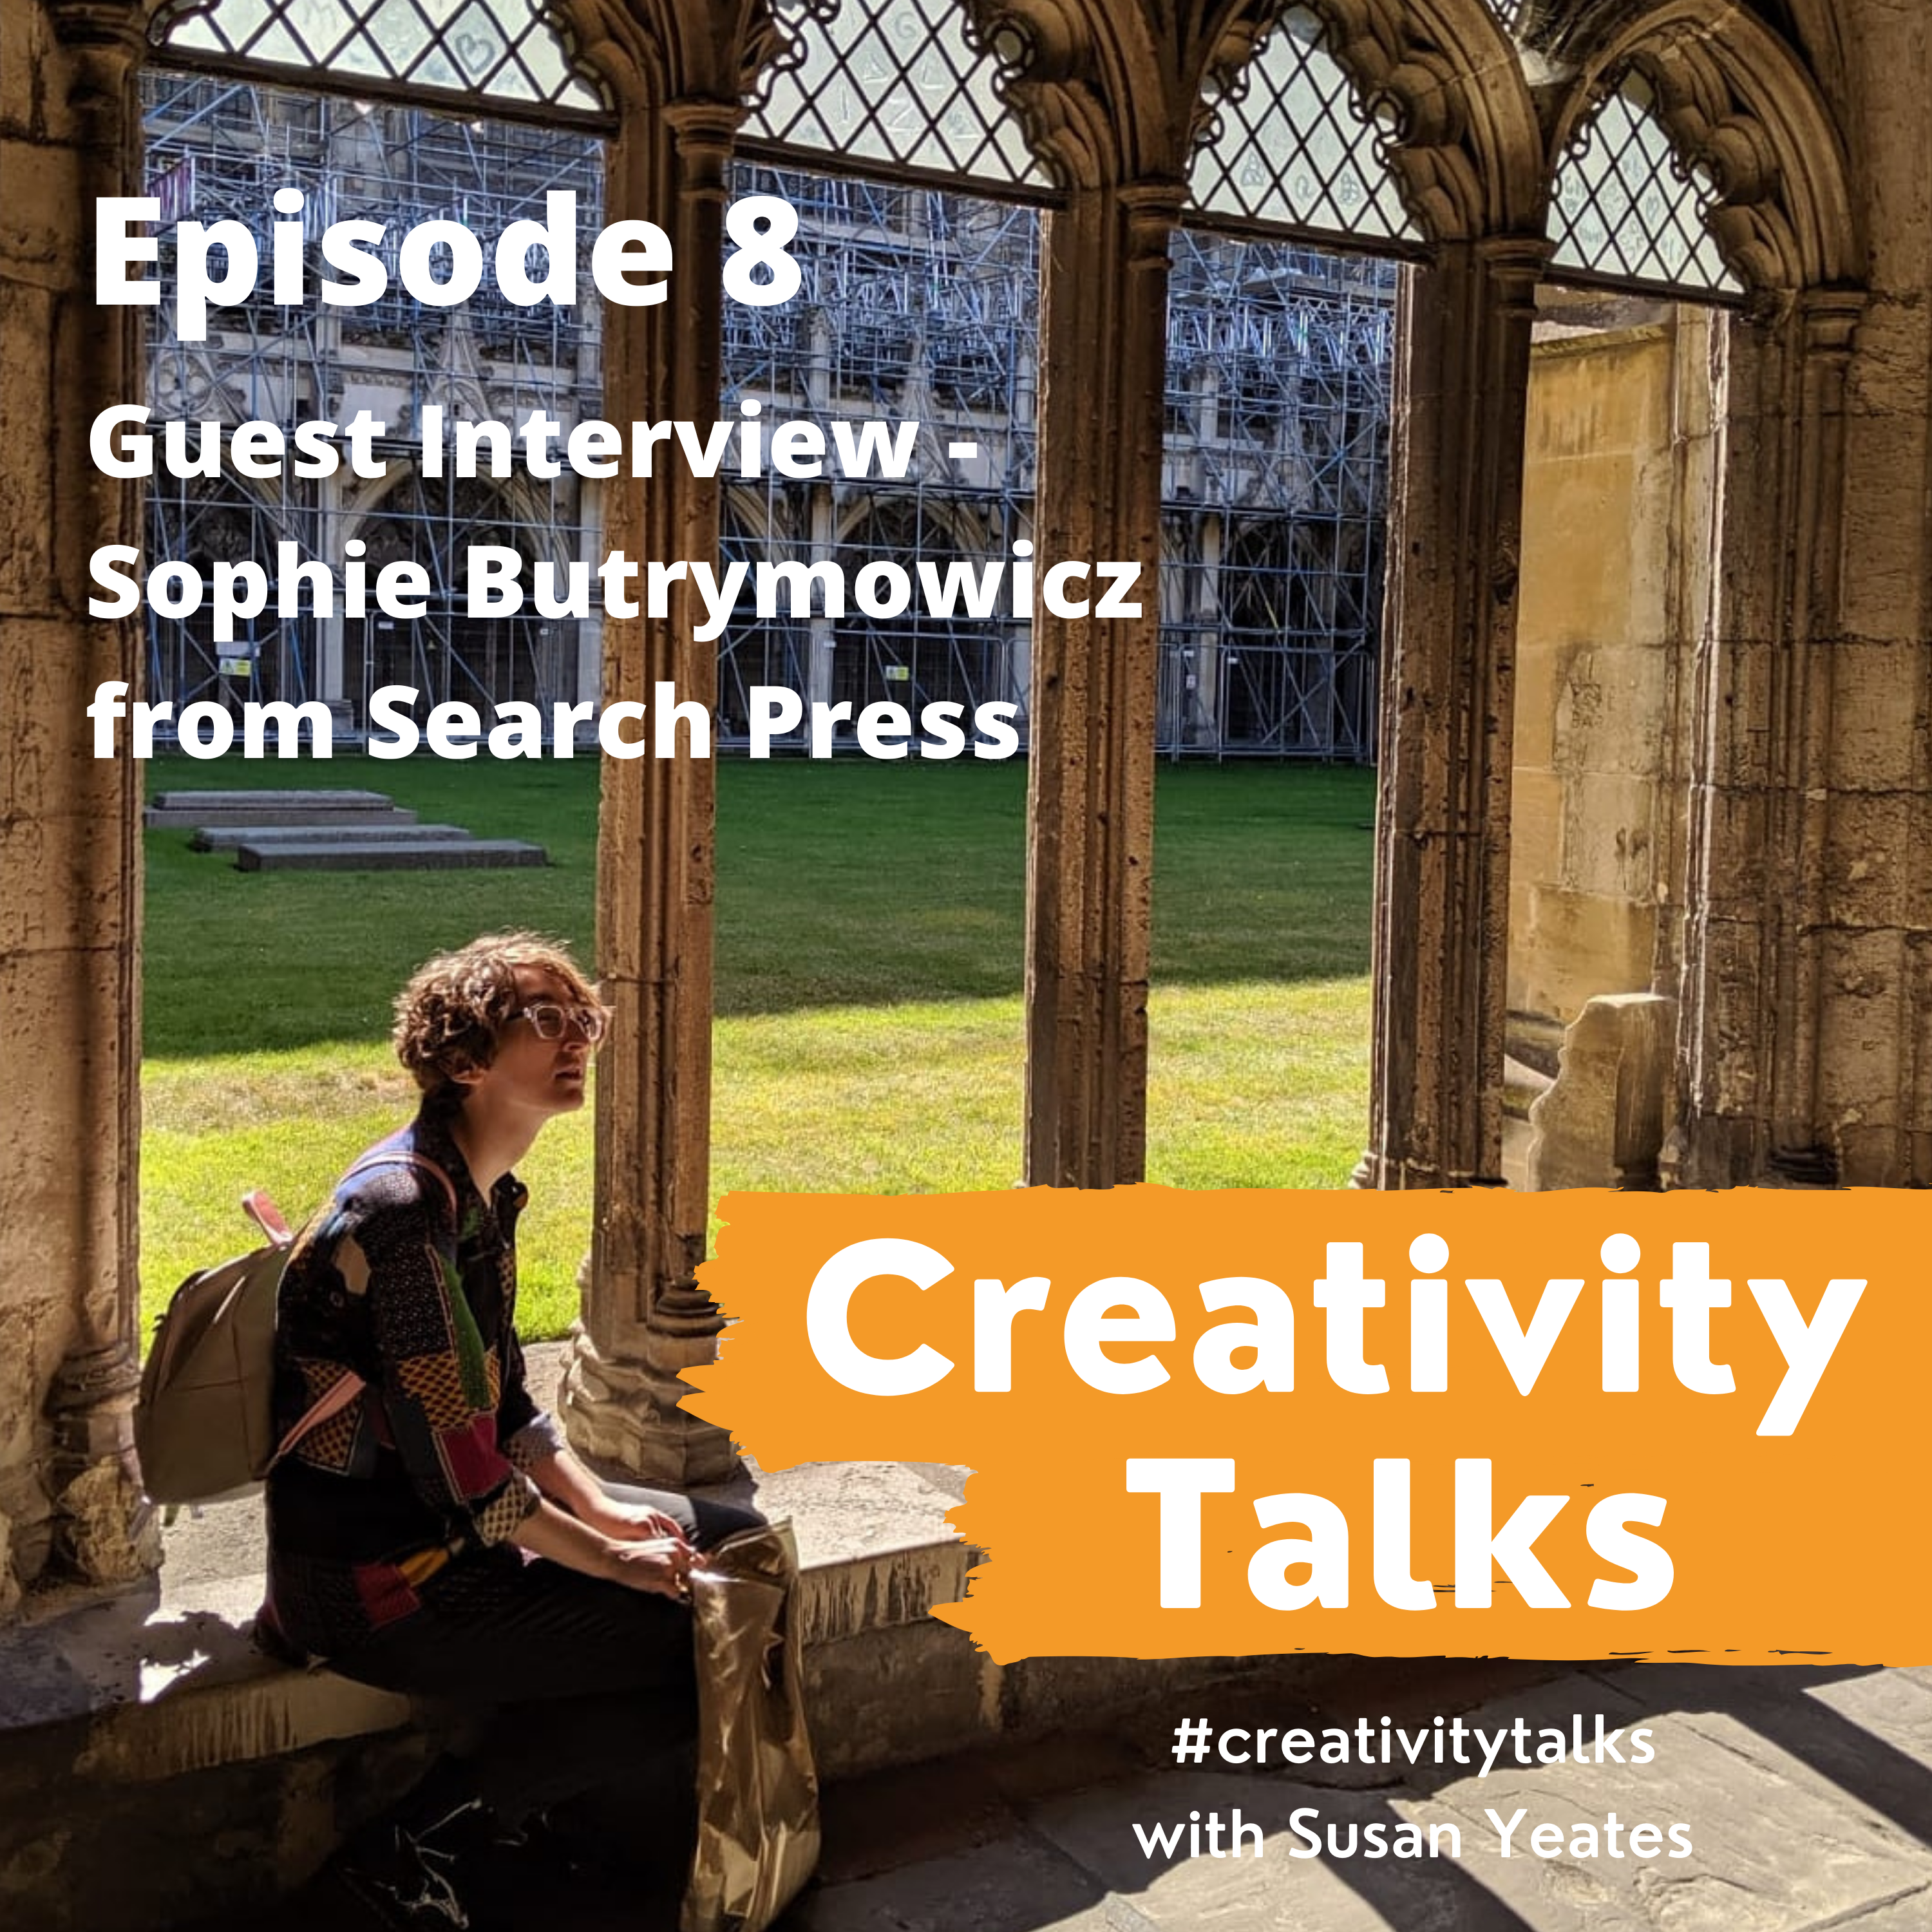 Creativity Talks 8: Guest interview with Sophie Butrymowicz (Search Press)